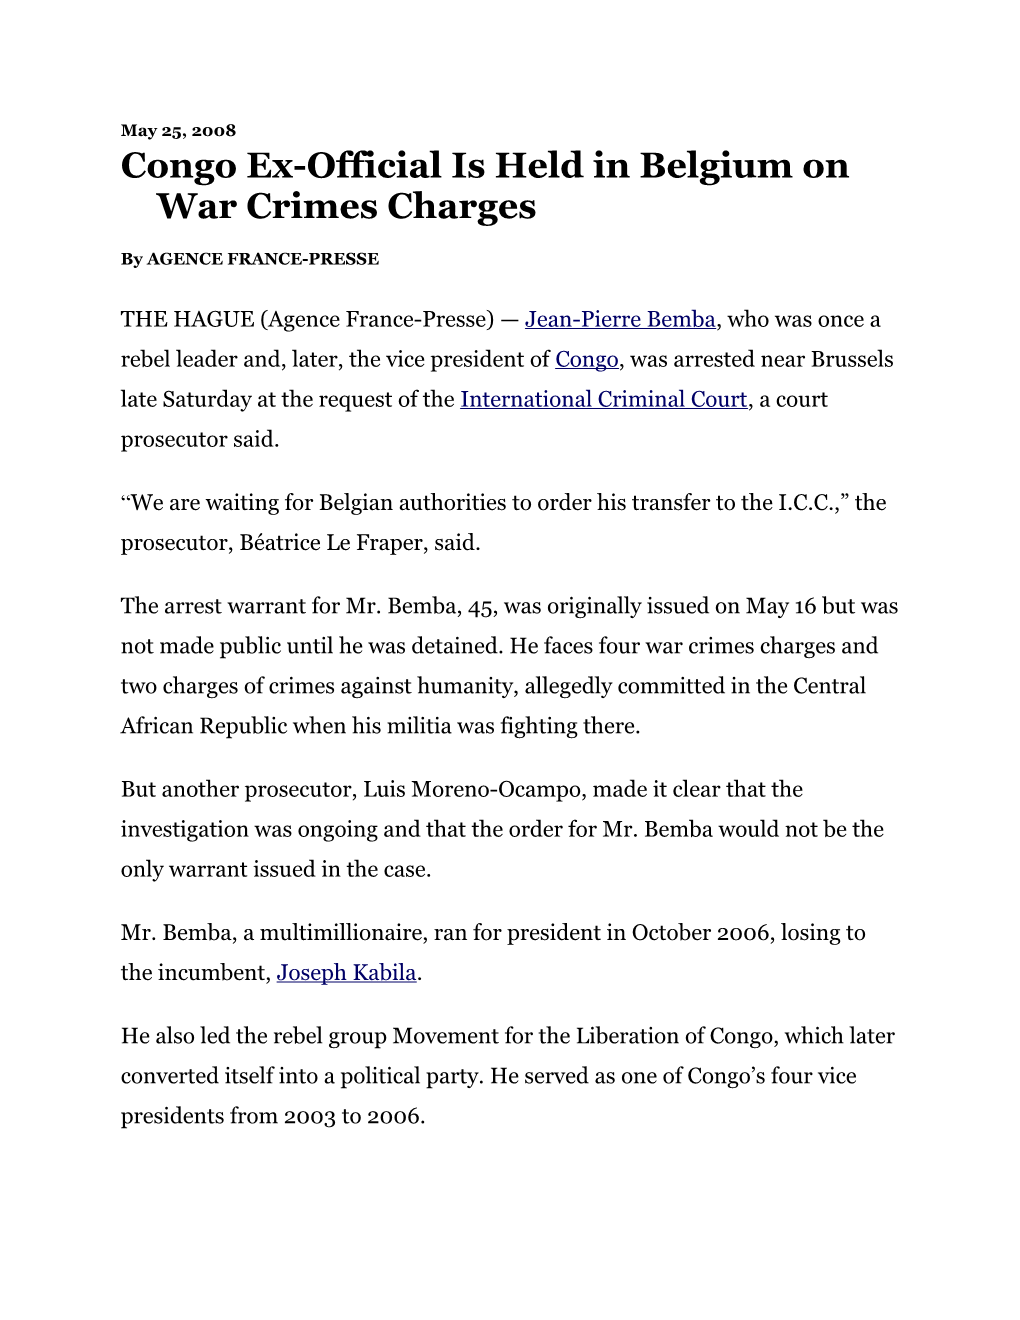 Congo Ex-Official Is Held in Belgium on War Crimes Charges